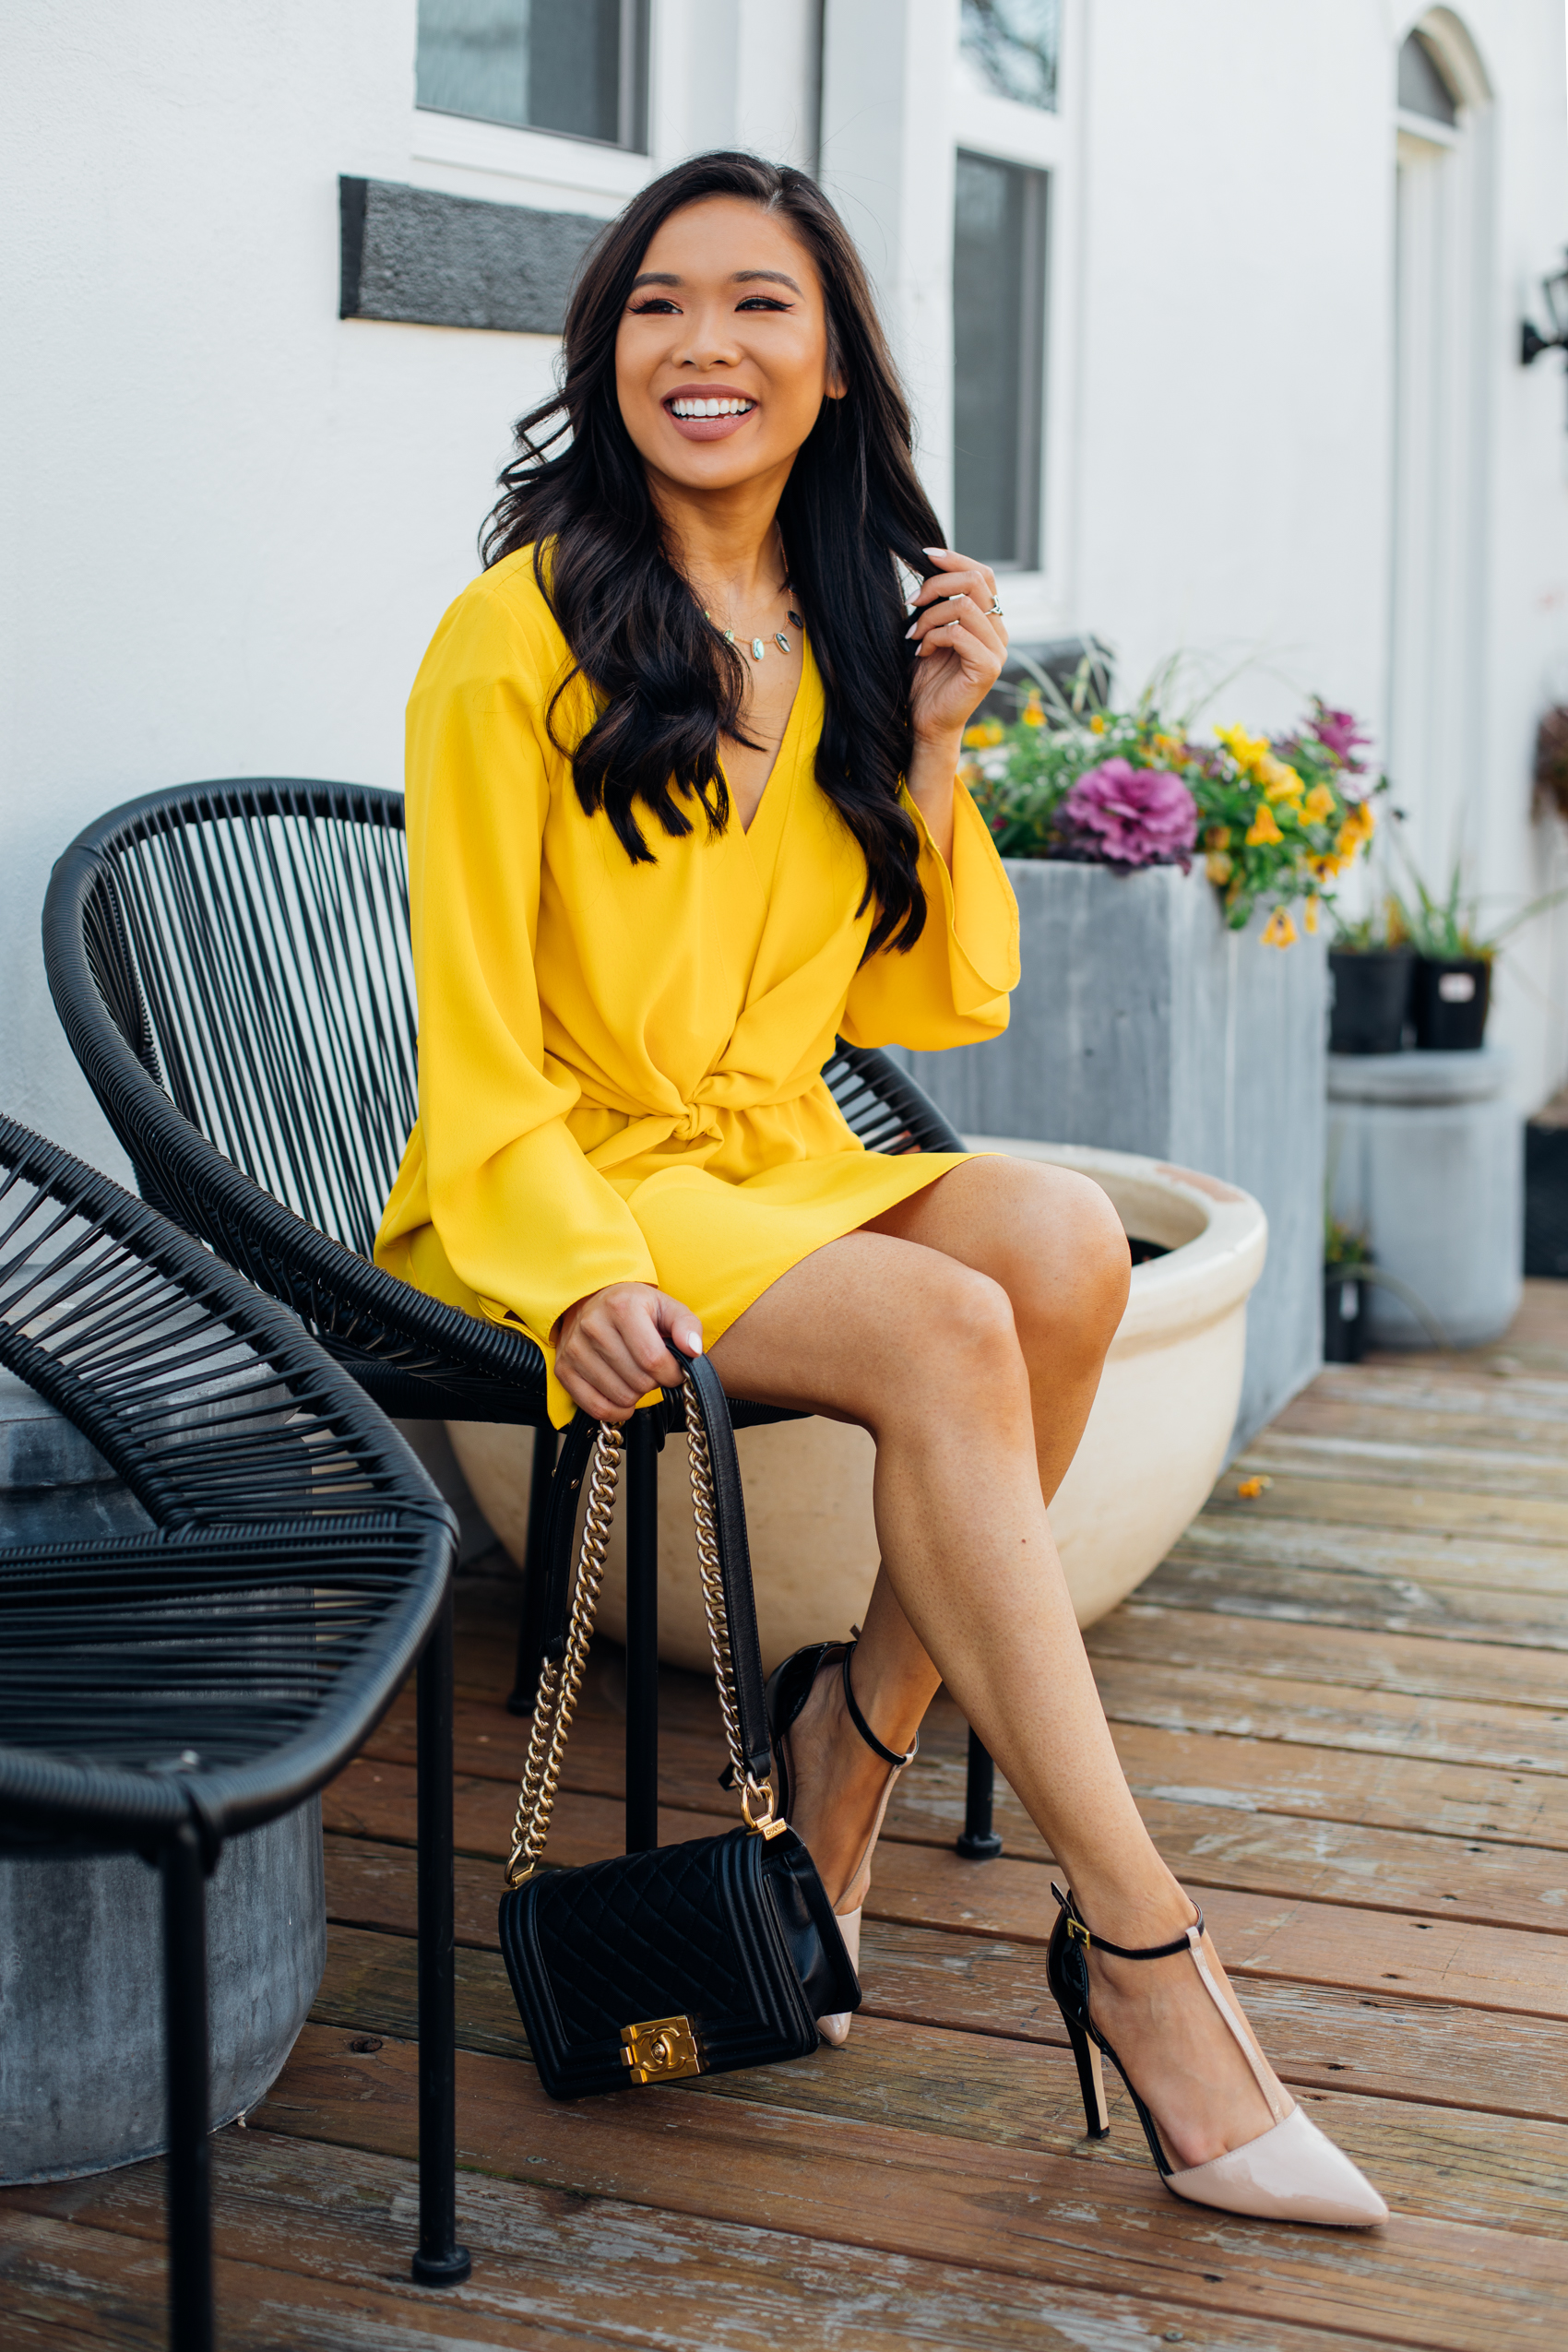 Blogger Hoang-Kim shares a spring dress for an outfit idea